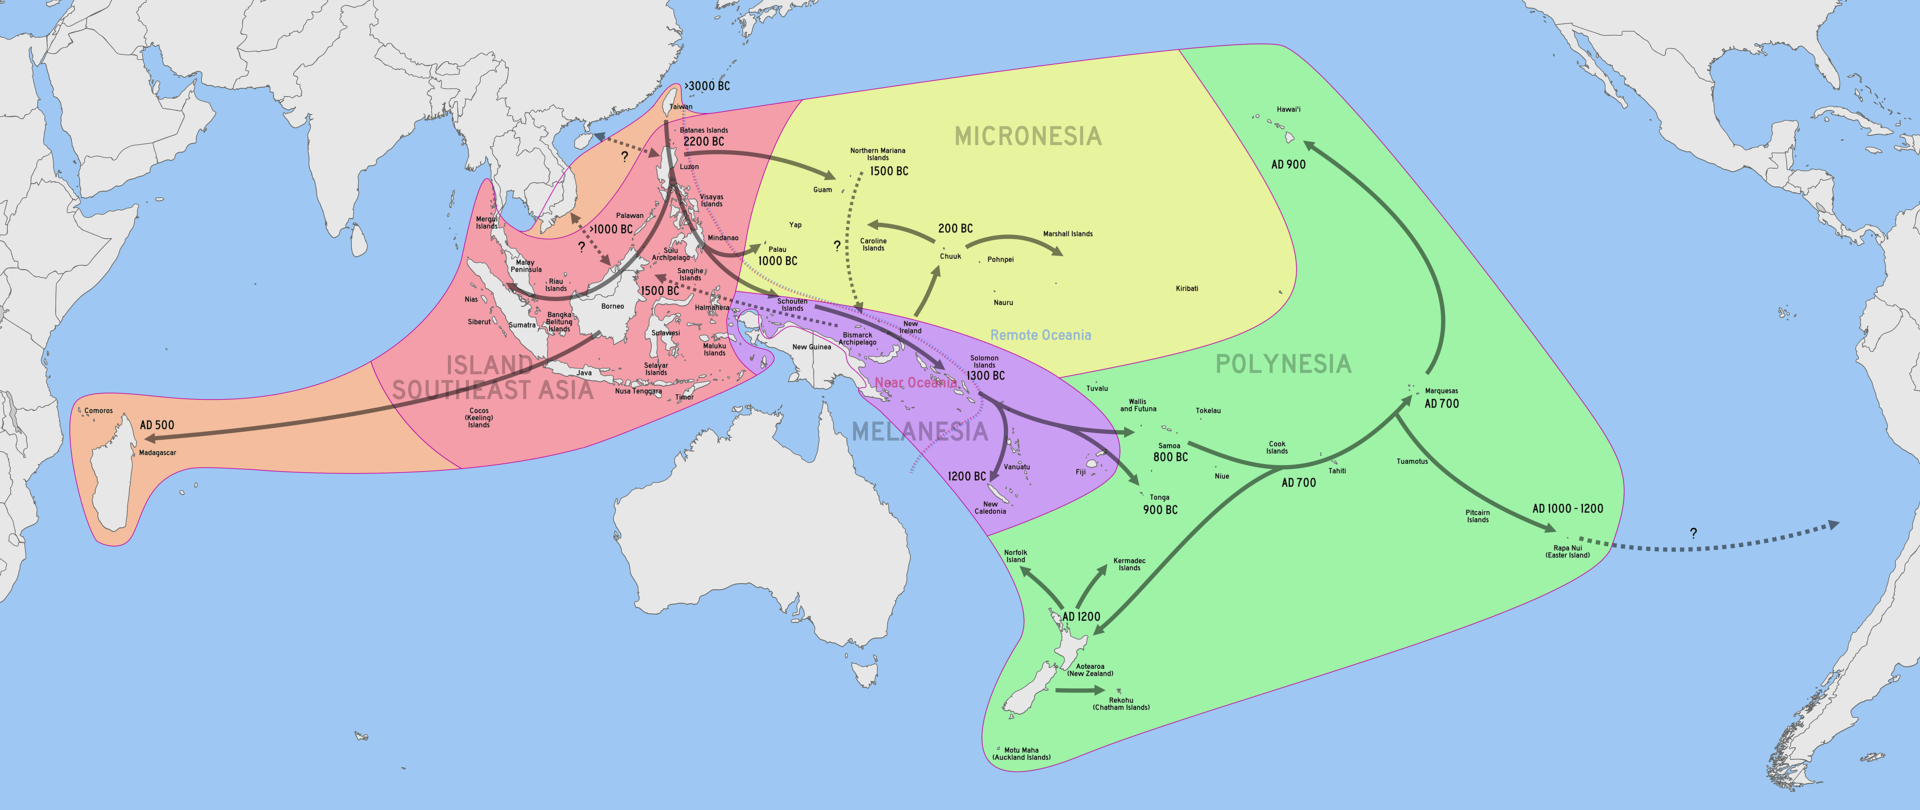 1920px-chronological_dispersal_of_austronesian_people_across_the_pacific_per_benton_et_al,_2012,_adapted_from_bellwood,_2011.png